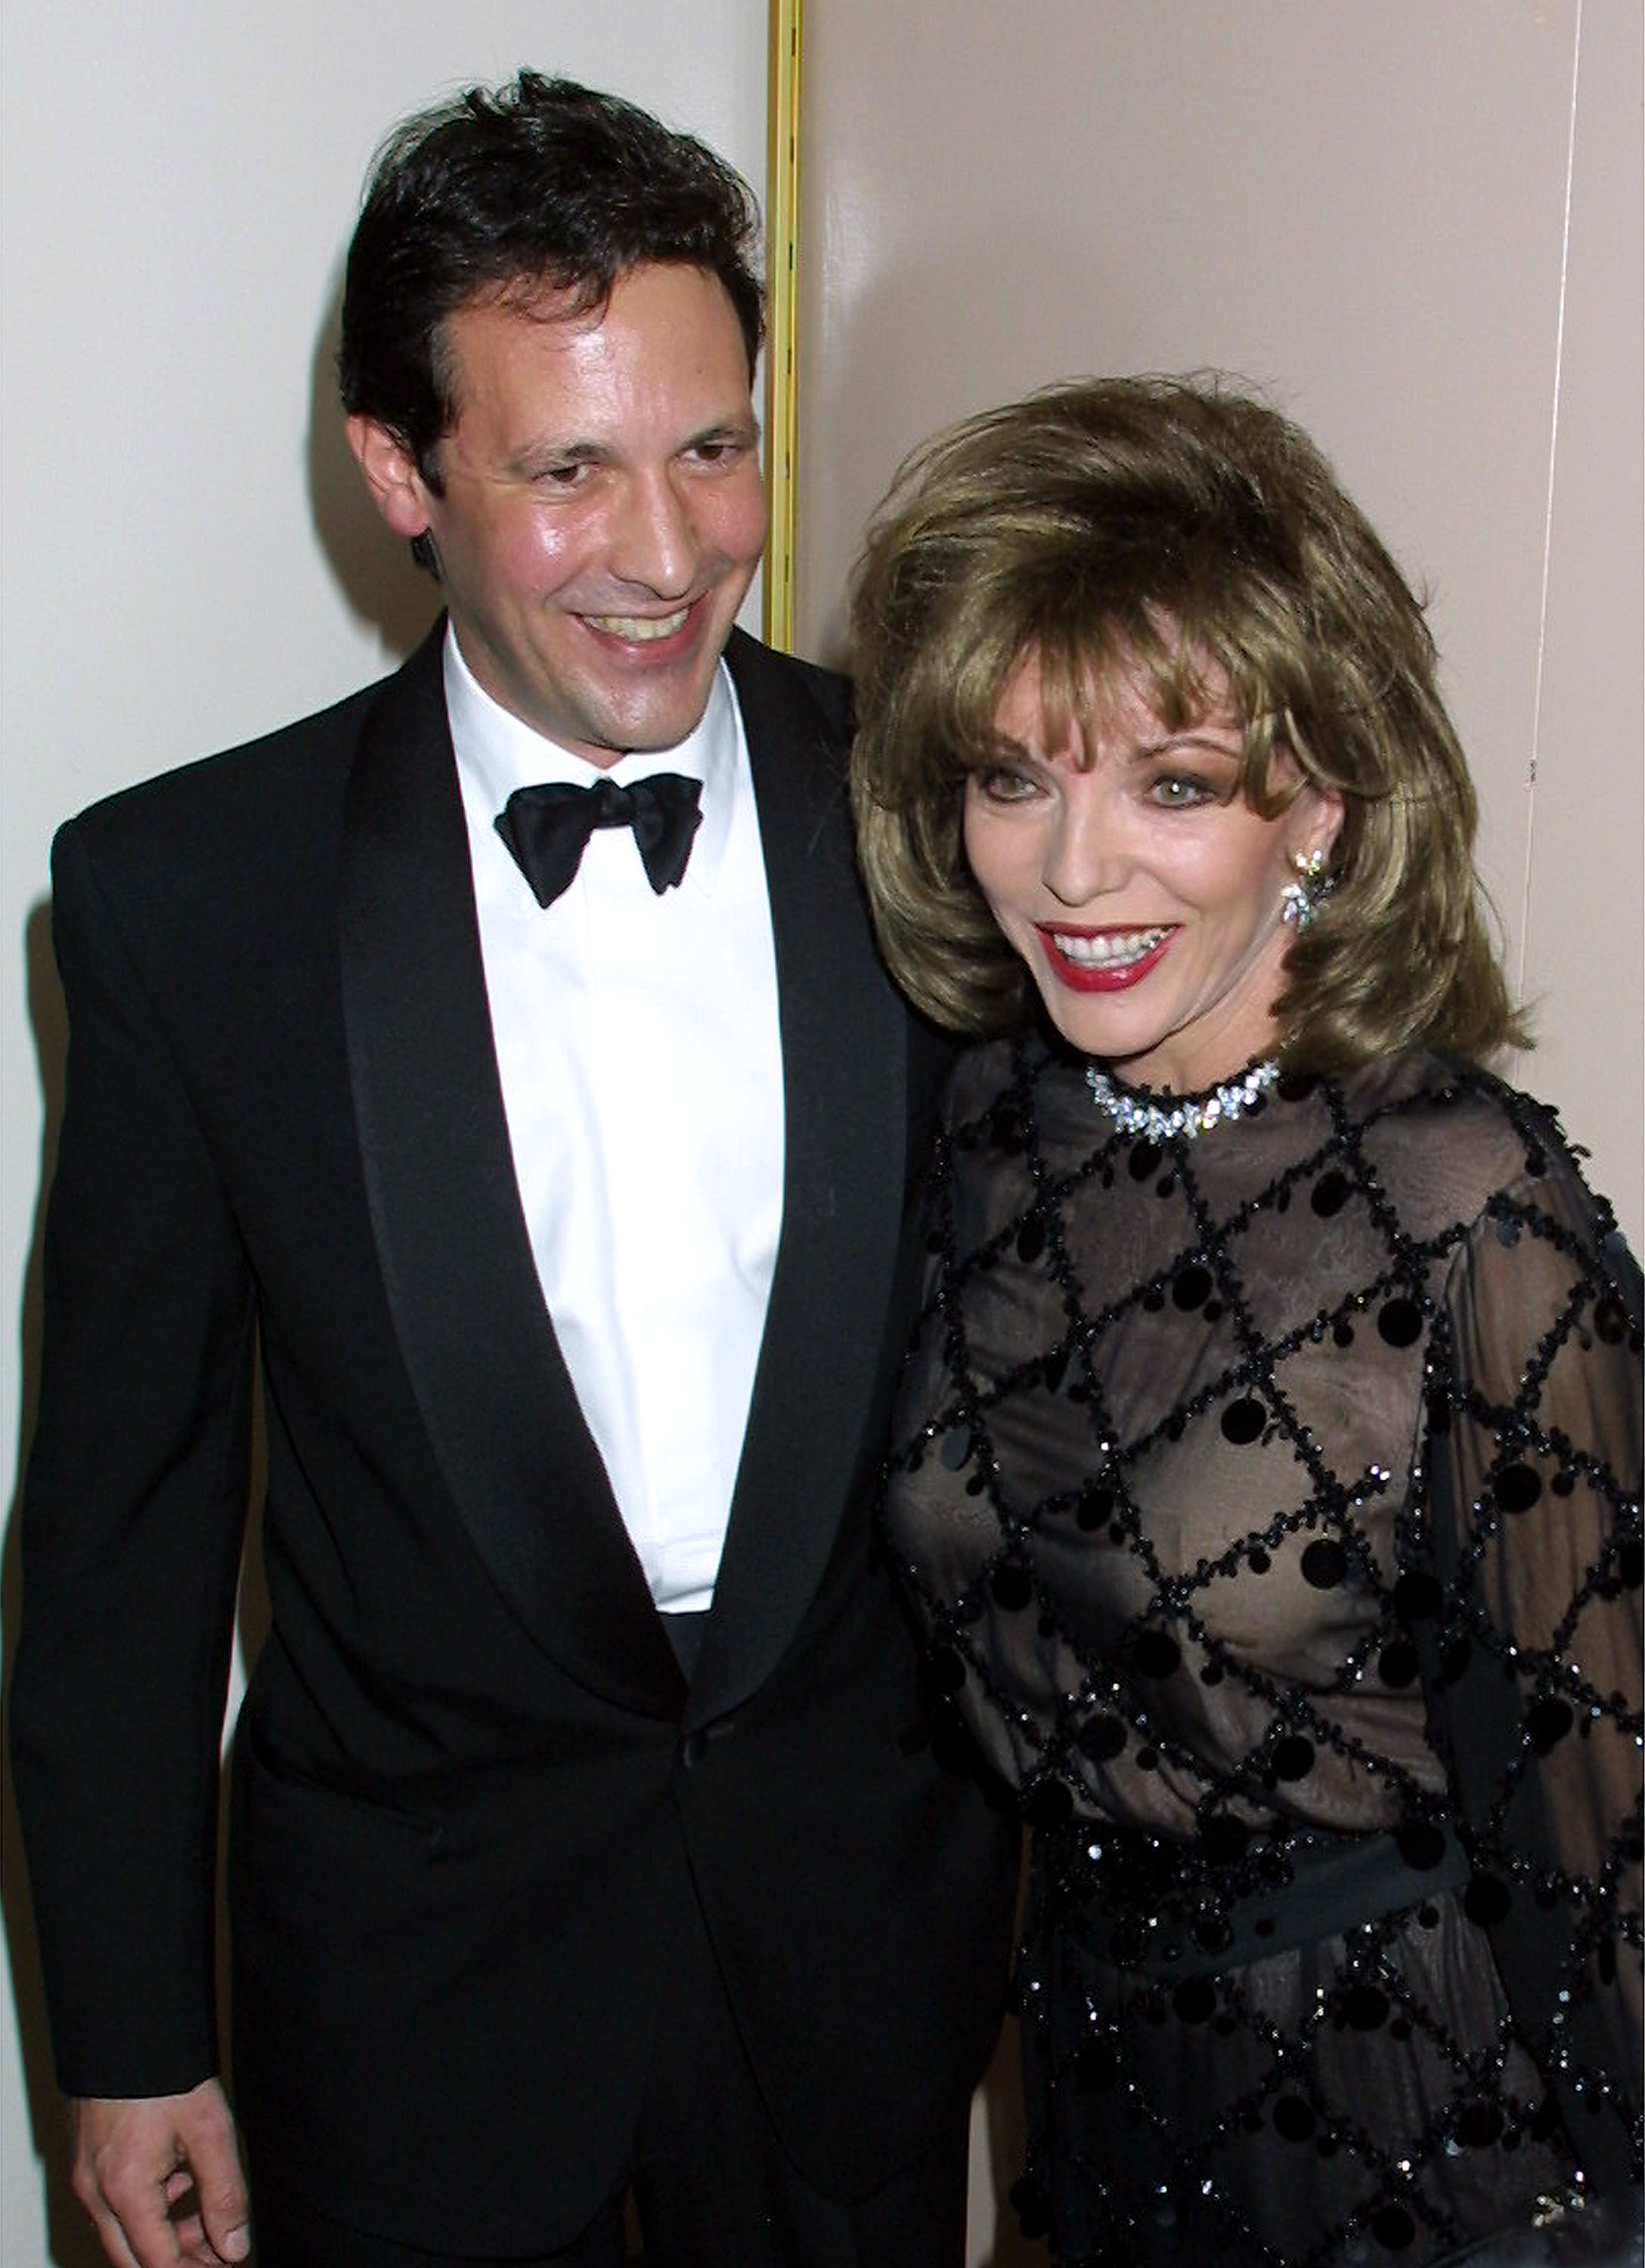 Joan Collins and her new boyfriend Percy Gibson at the 12th Annual GLAAD Media Awards on April 16, 2001, in New York City | Source: Getty Images